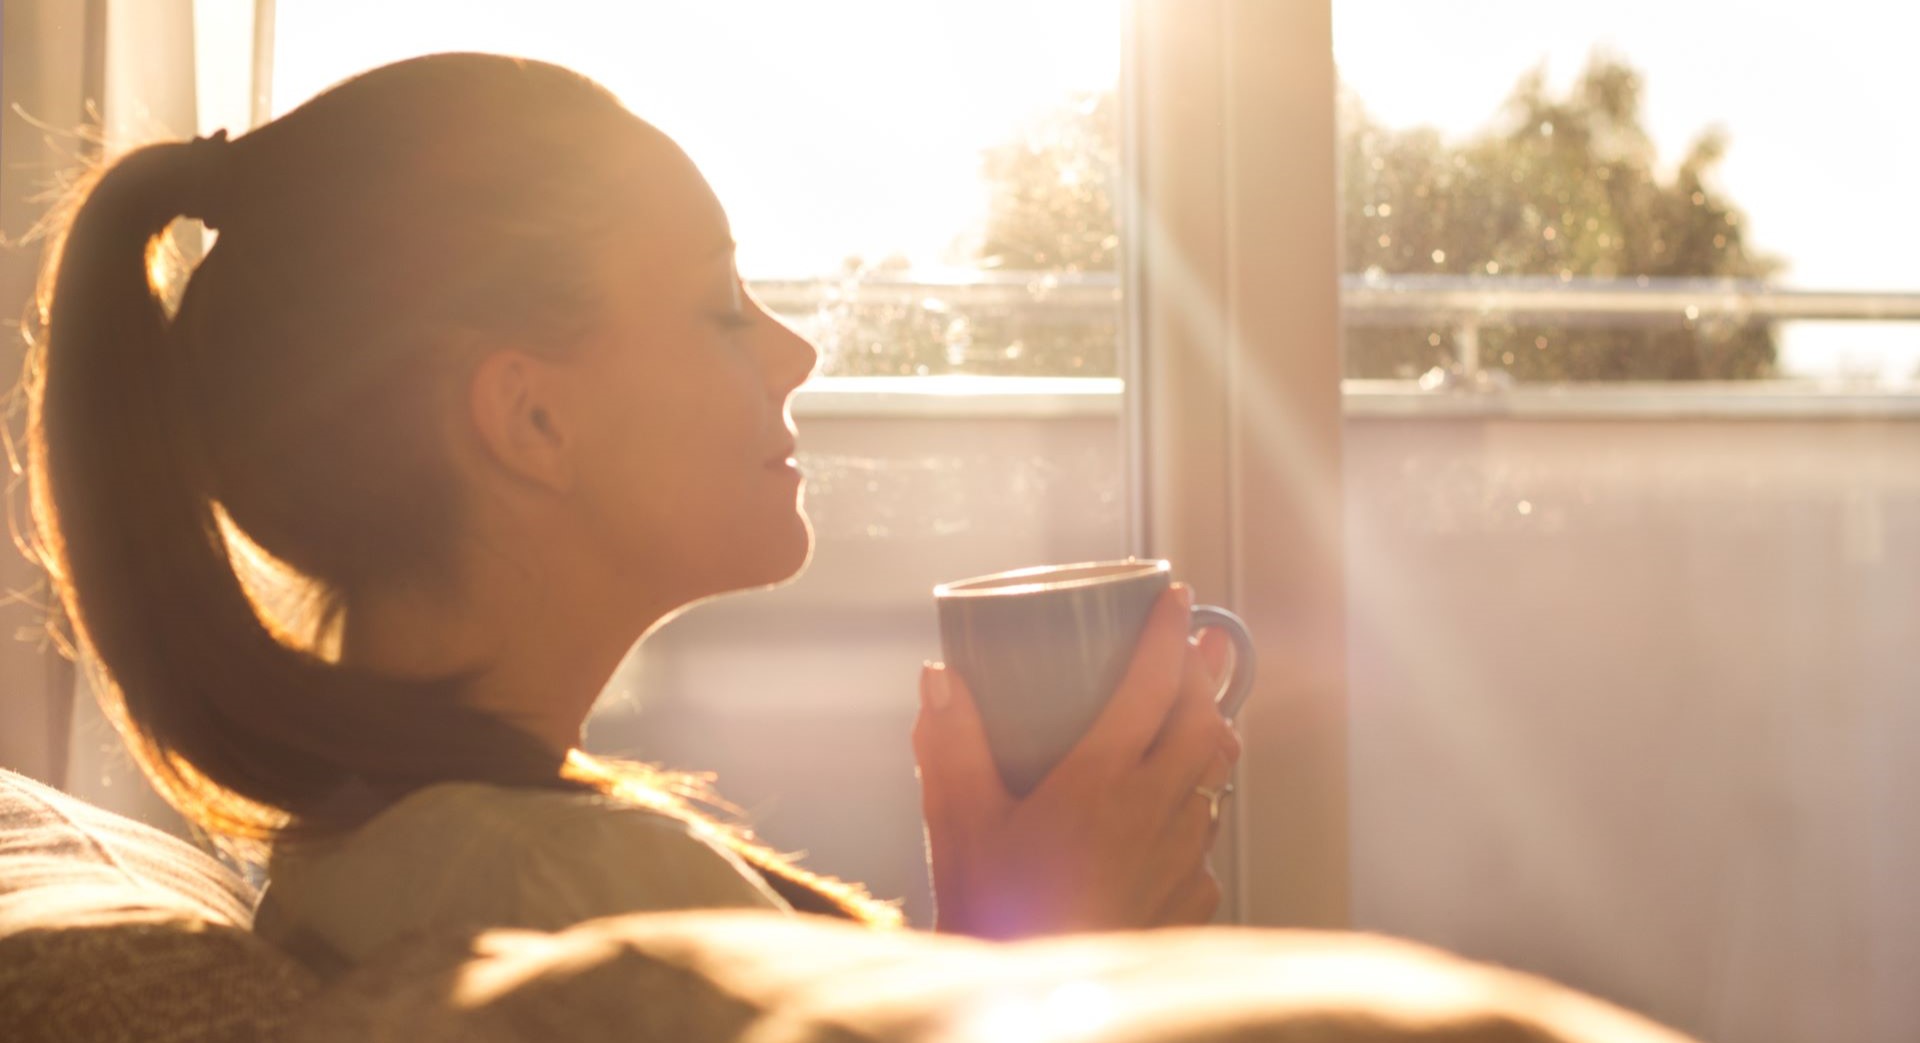 Woman sitting on couch with coffee mug with early morning sunlight in window